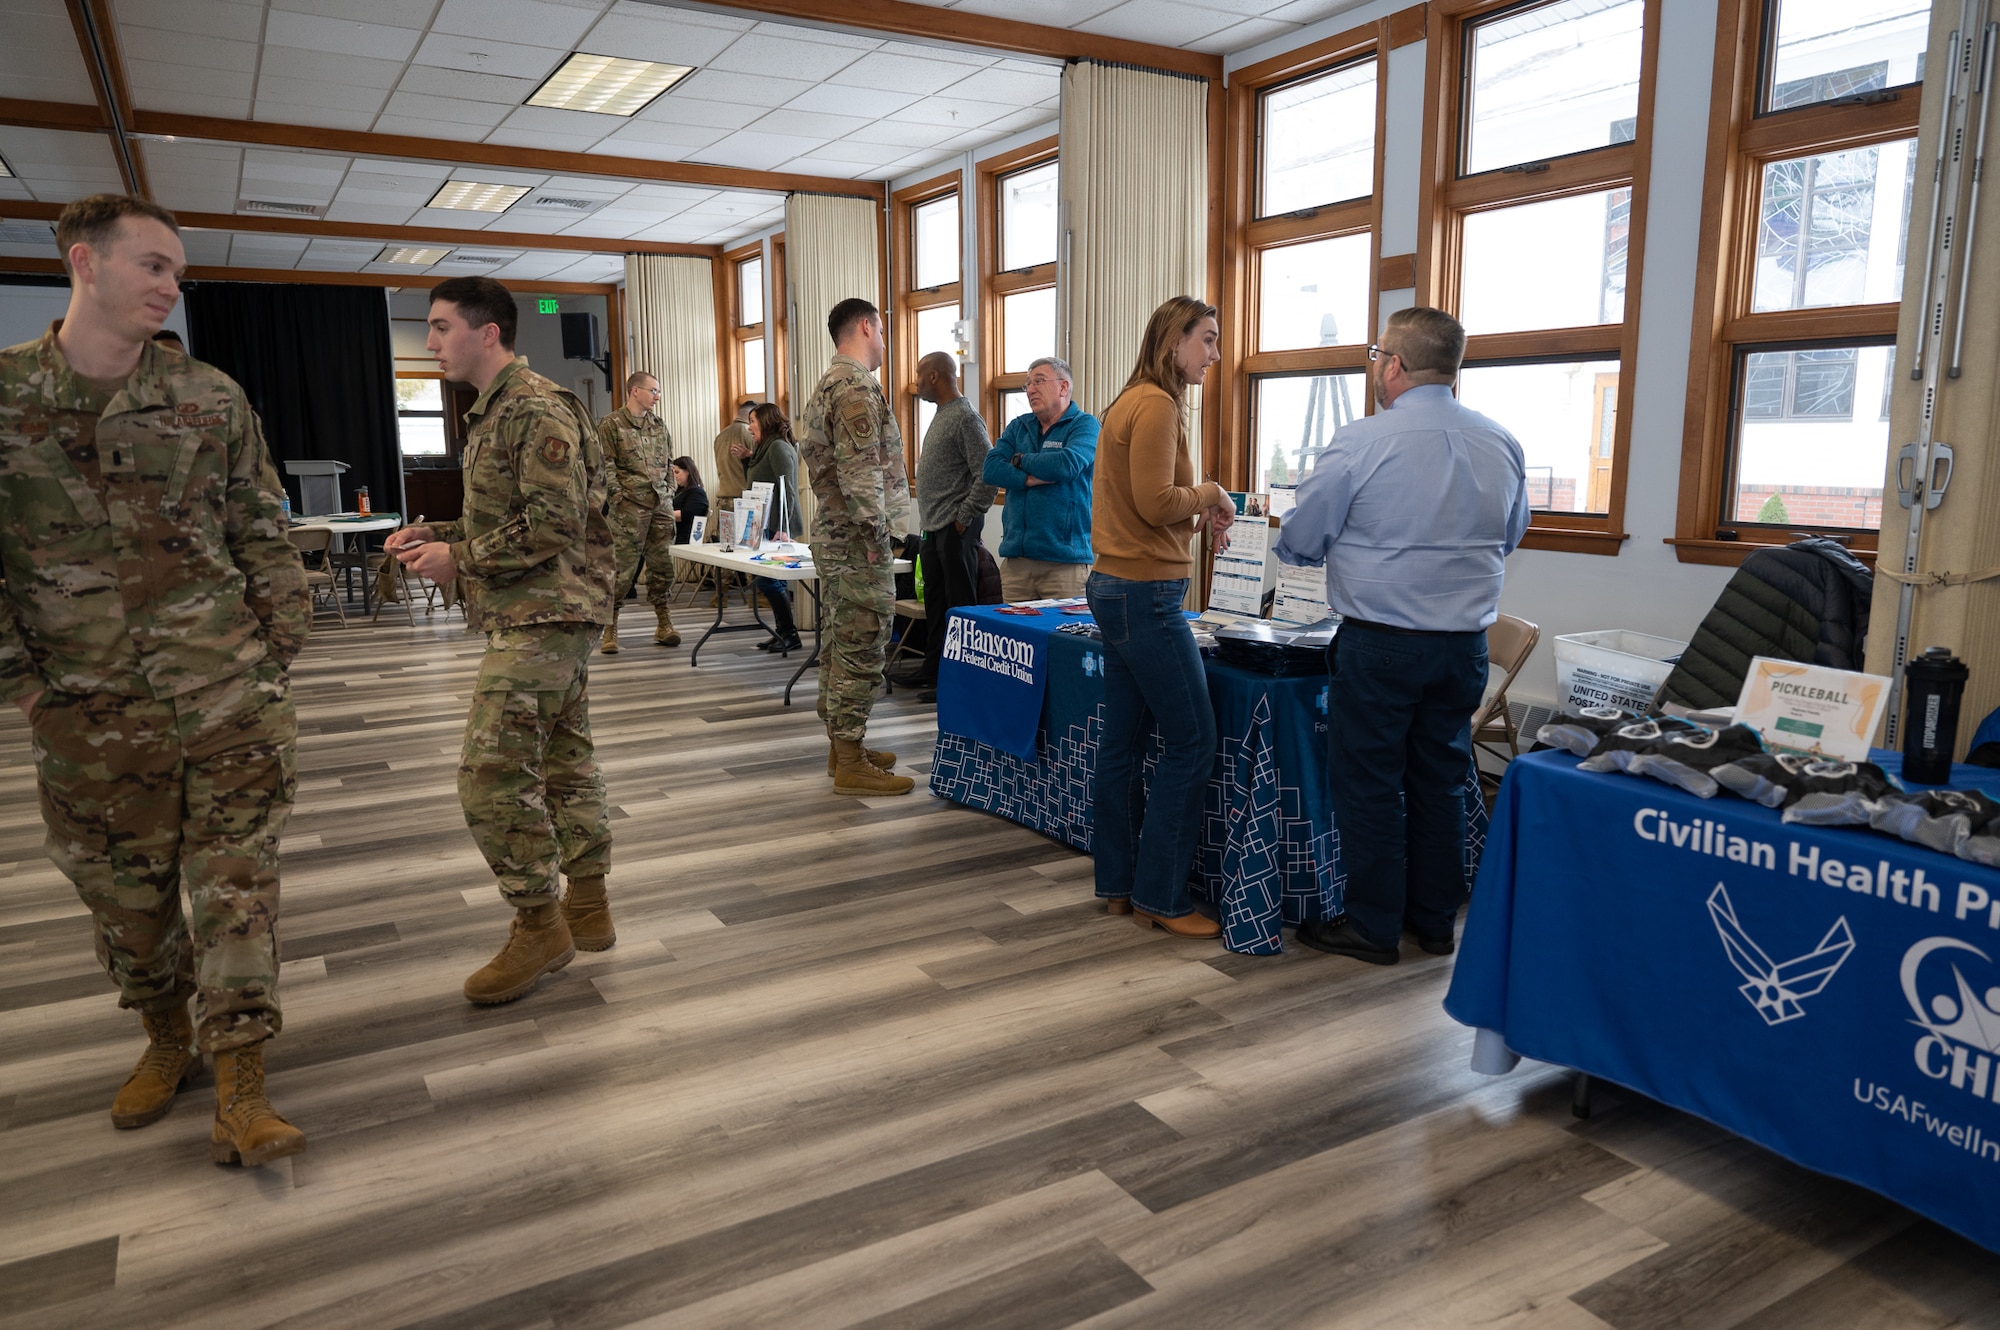 military members and civilians walk between tables and booths at the information fair.